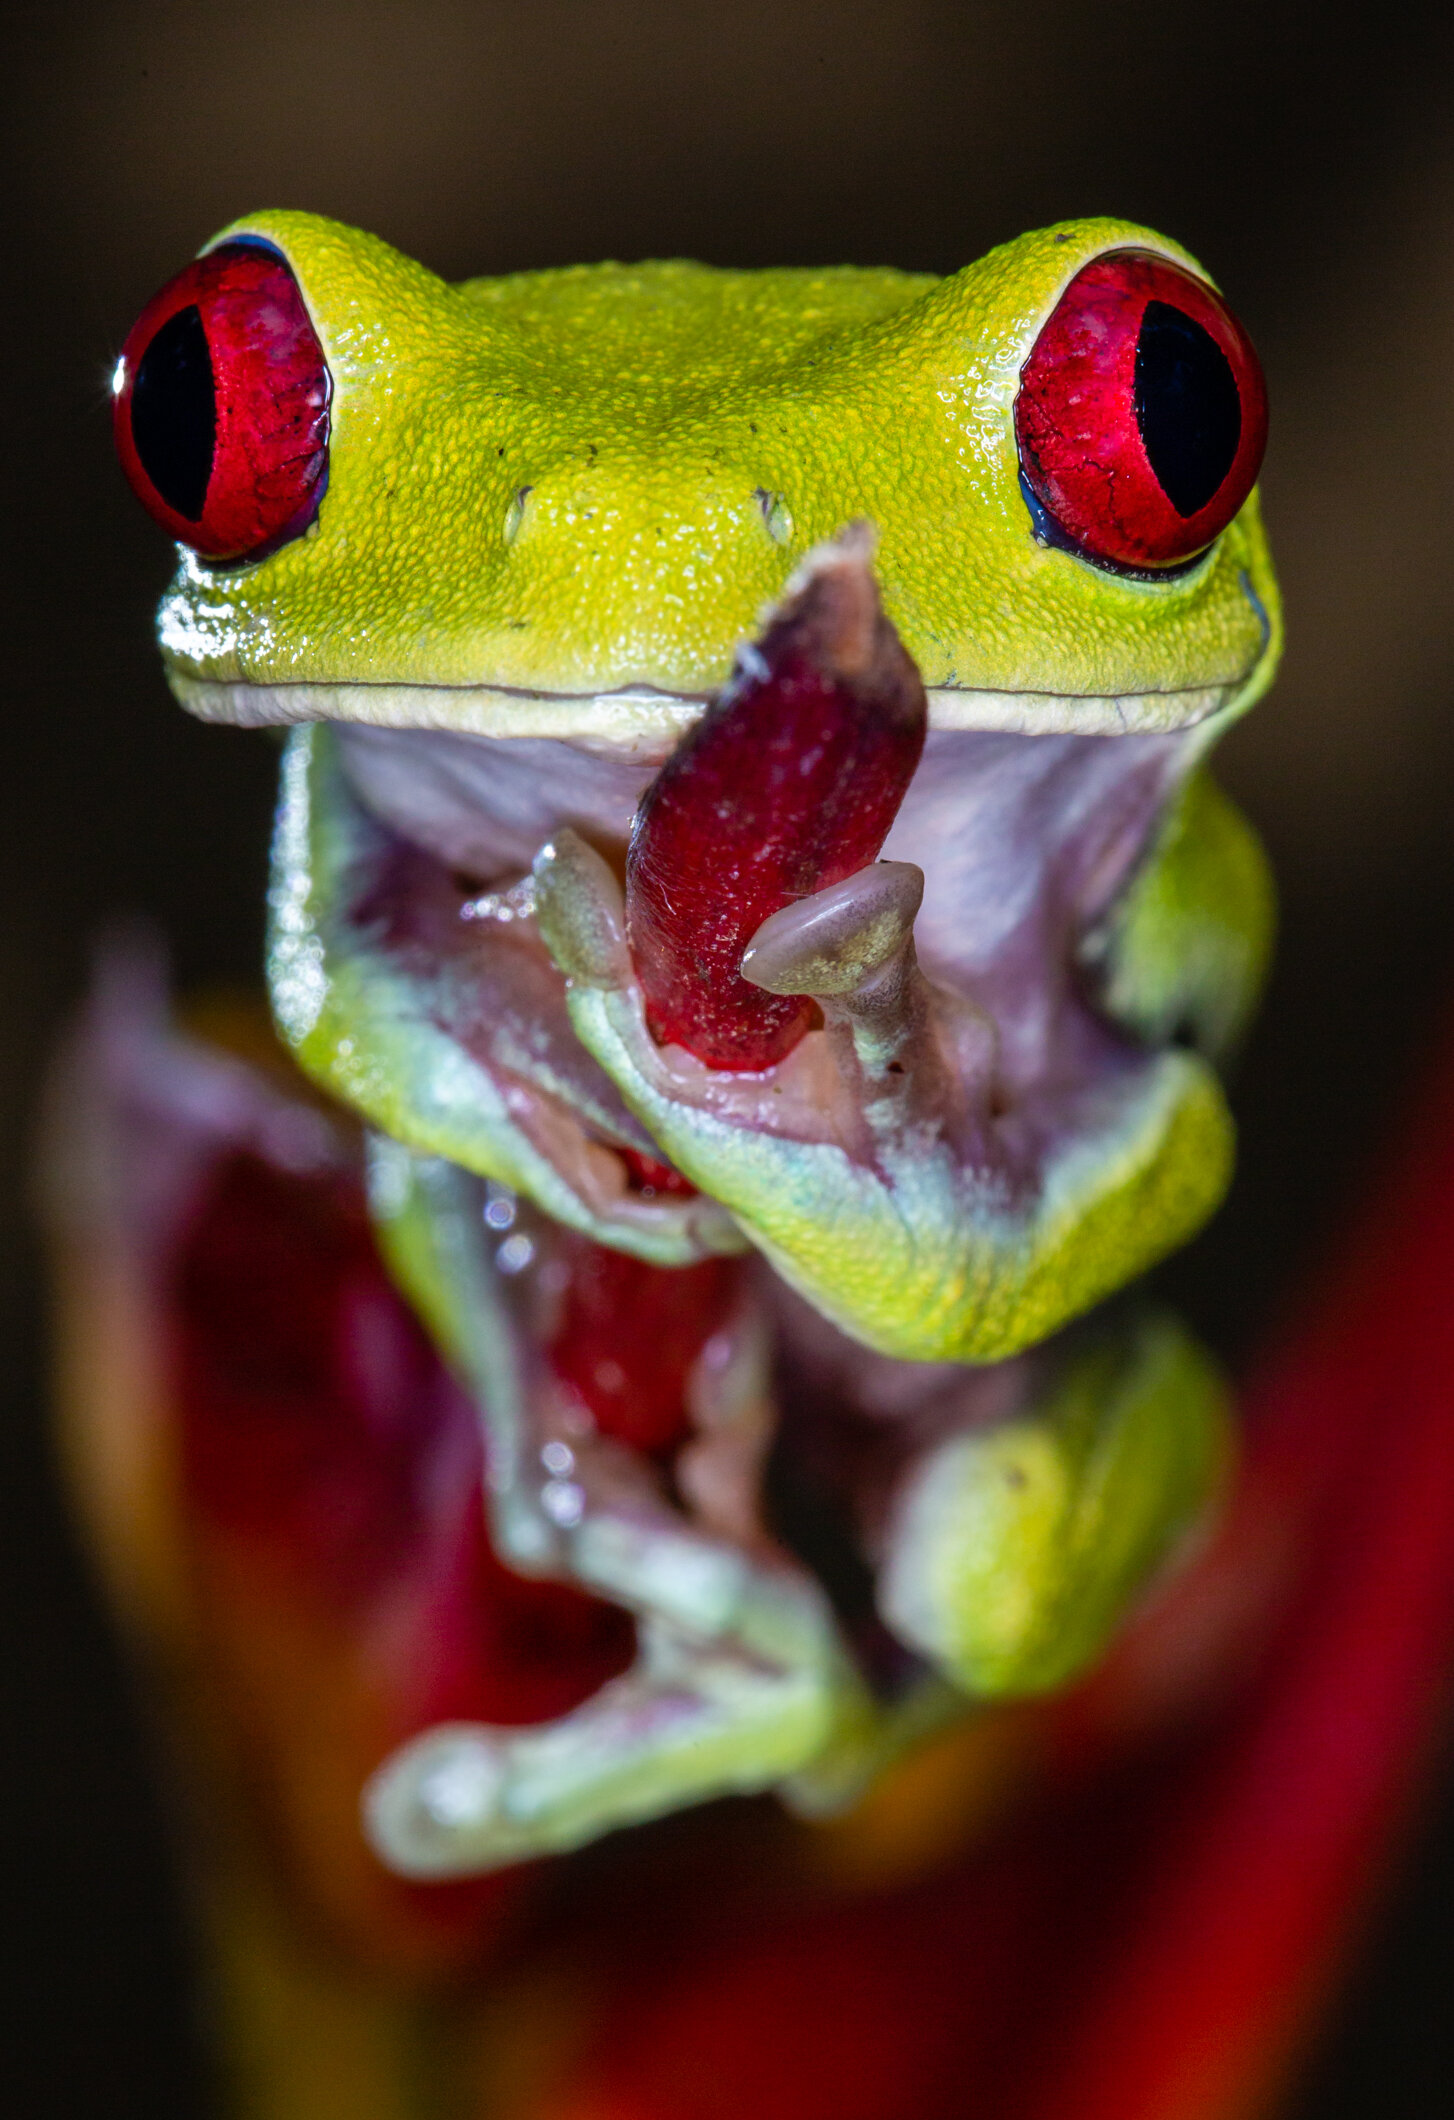 Wall-Eyed (Red Eye Tree Frog)